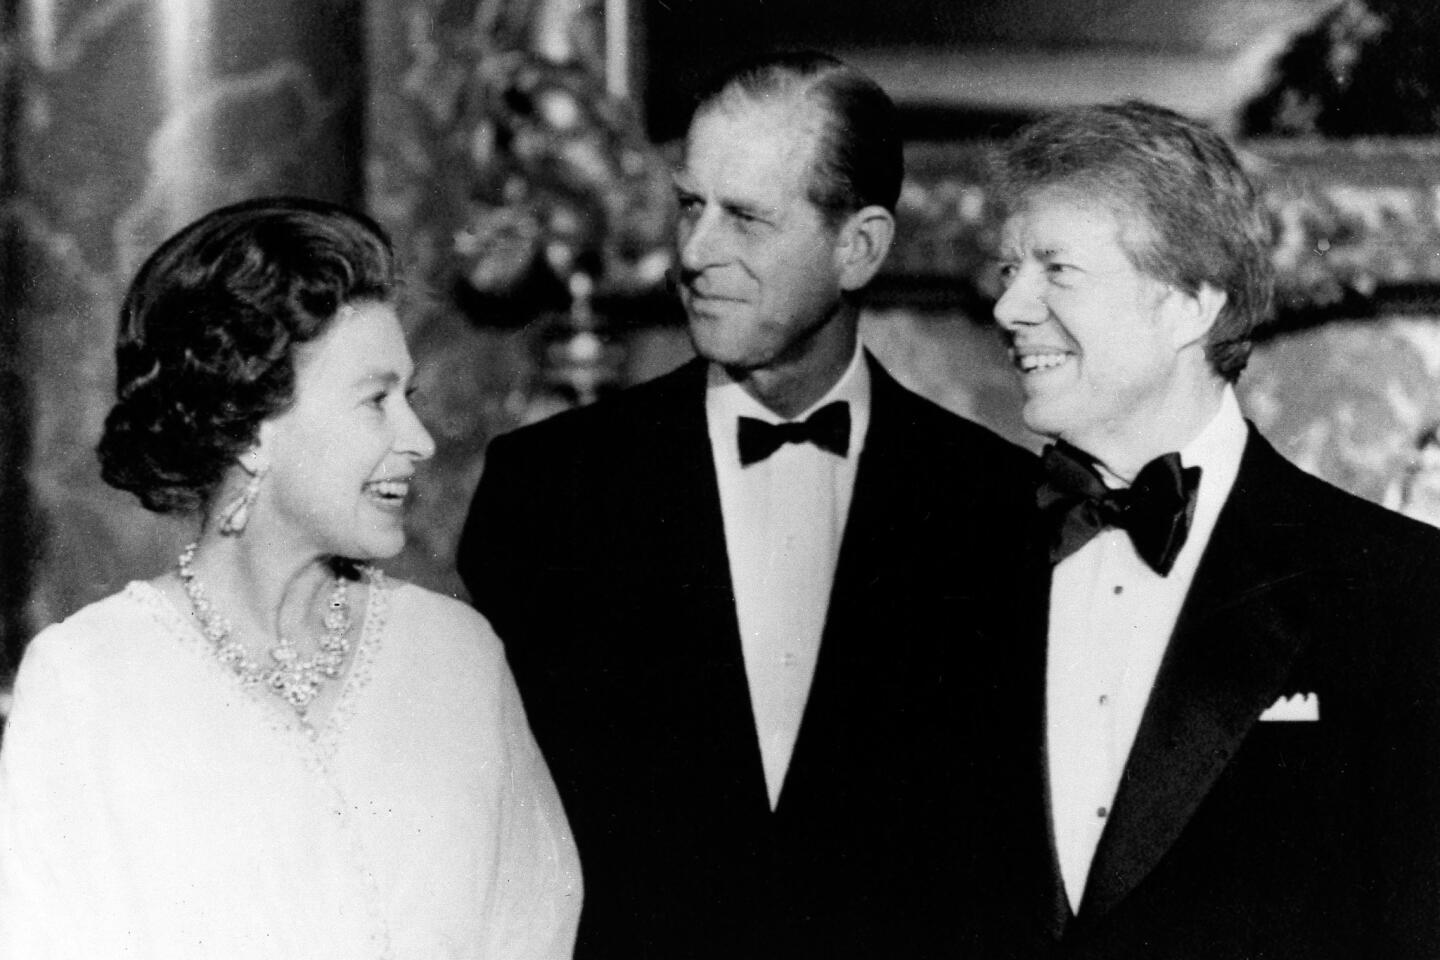 President Carter in May 1977 with Queen Elizabeth II and Prince Philip at Buckingham Palace.